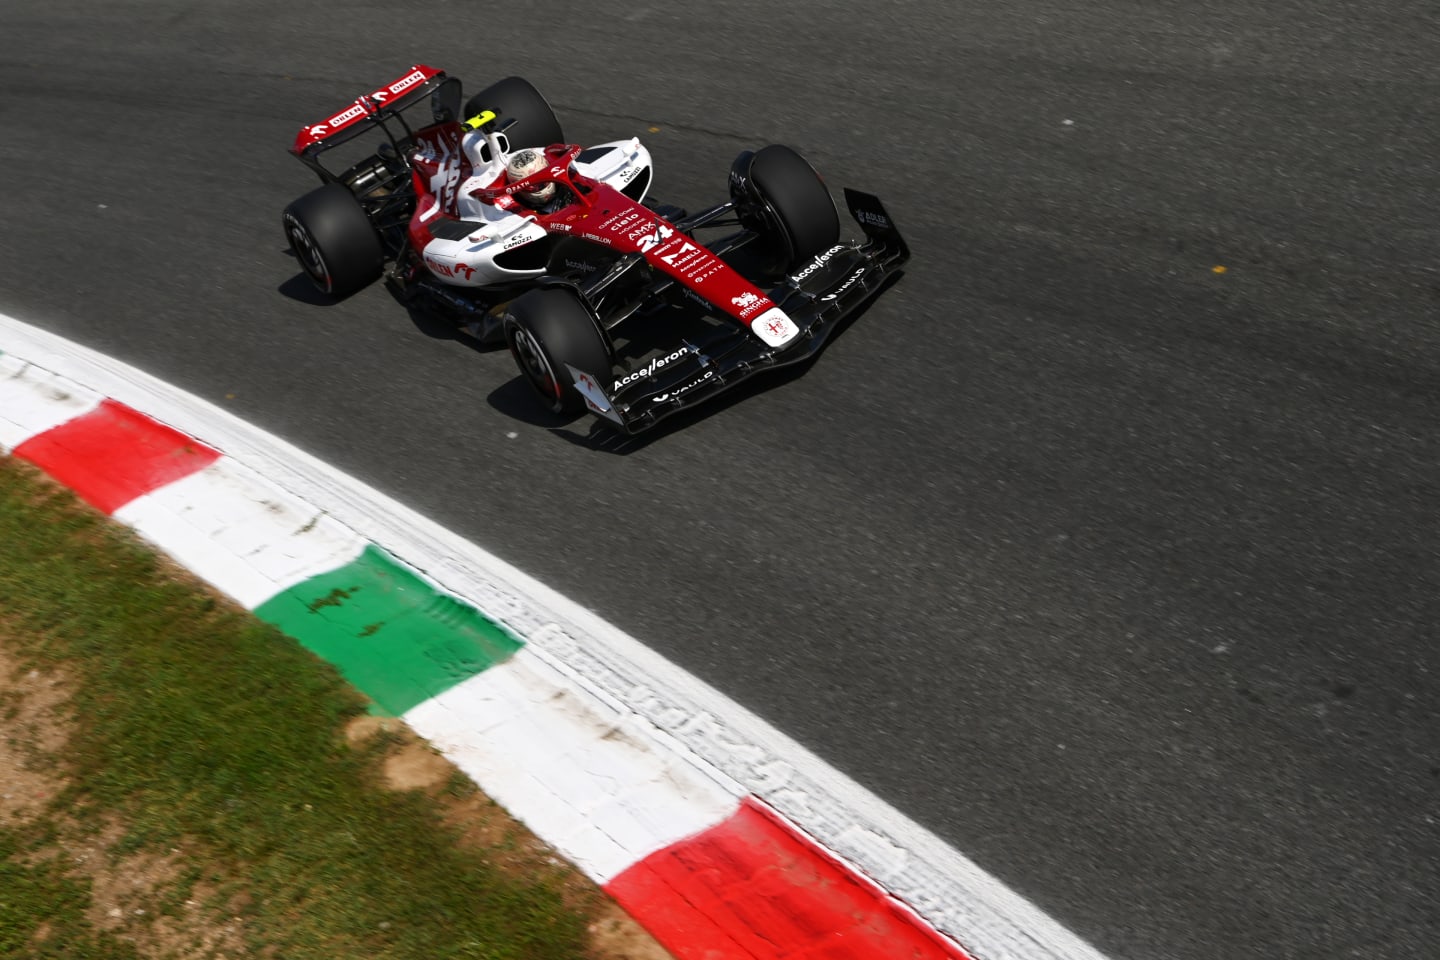 MONZA, ITALY - SEPTEMBER 09: Zhou Guanyu of China driving the (24) Alfa Romeo F1 C42 Ferrari on track during practice ahead of the F1 Grand Prix of Italy at Autodromo Nazionale Monza on September 09, 2022 in Monza, Italy. (Photo by Dan Mullan/Getty Images)